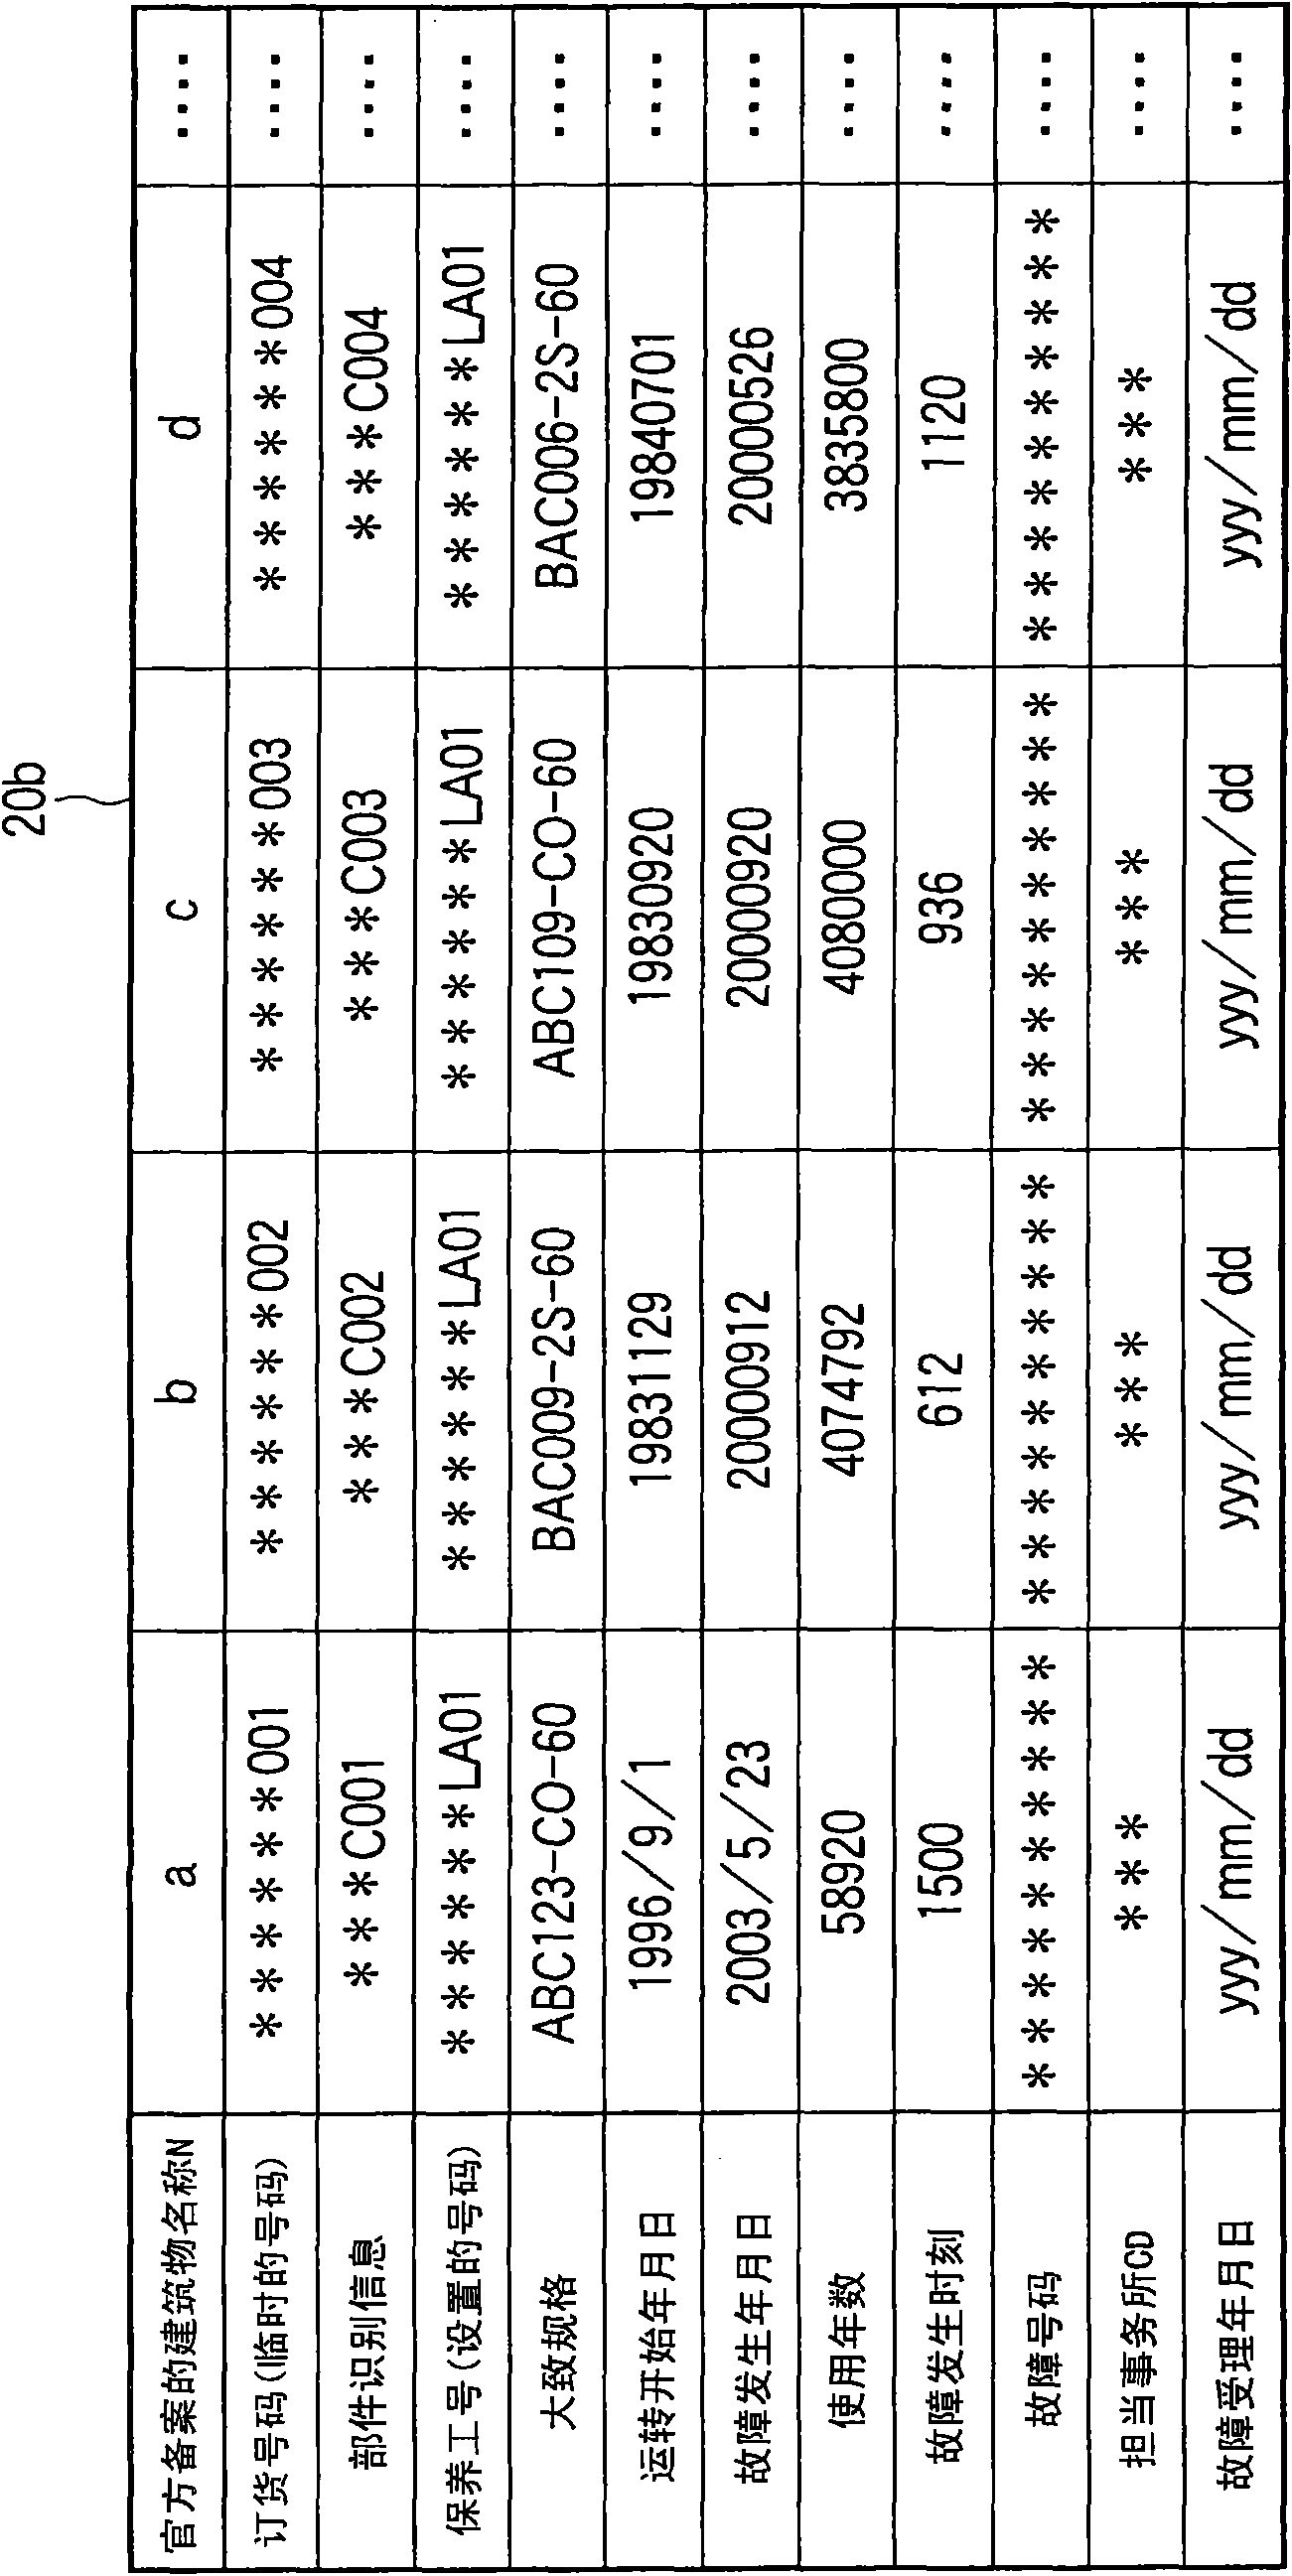 Elevator component improvement plan system and elevator component improvement plan method